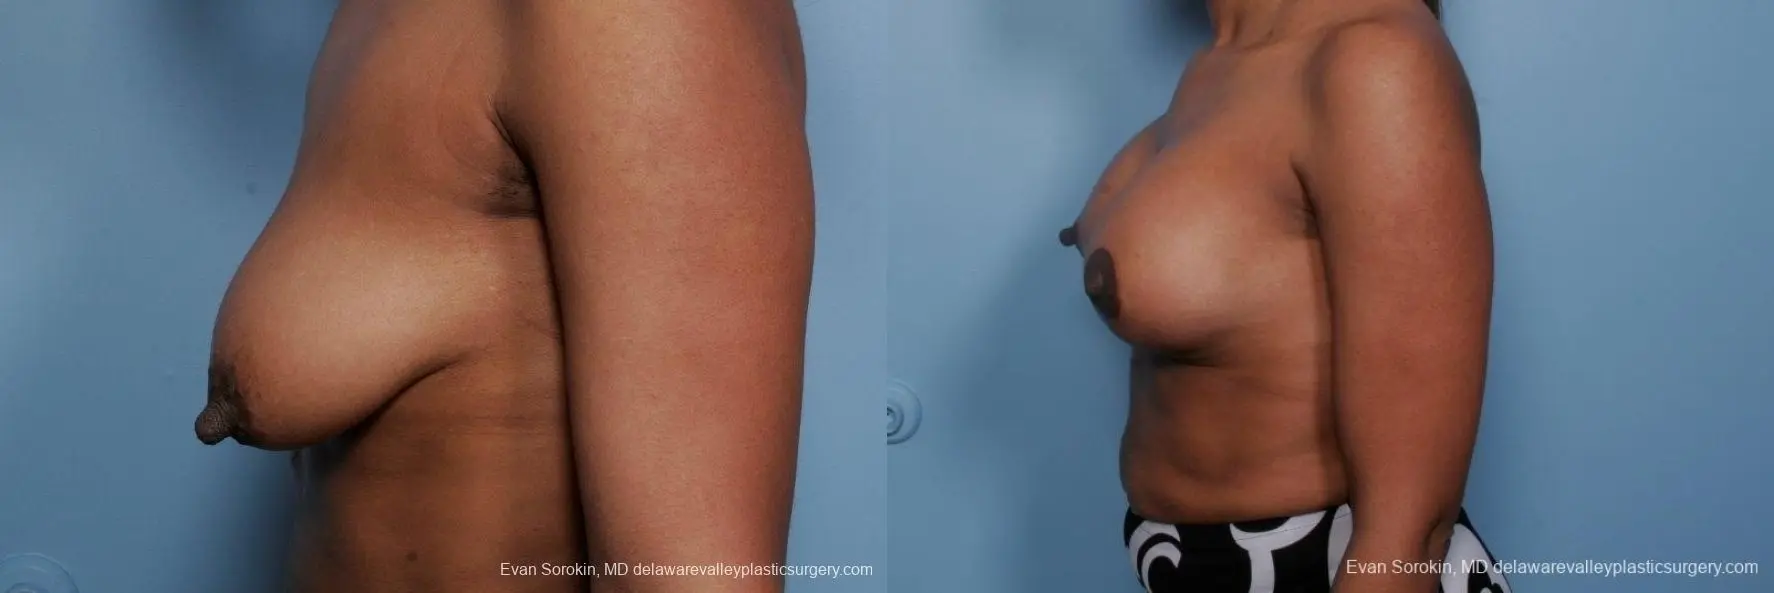 Philadelphia Breast Lift and Augmentation 8689 - Before and After 5